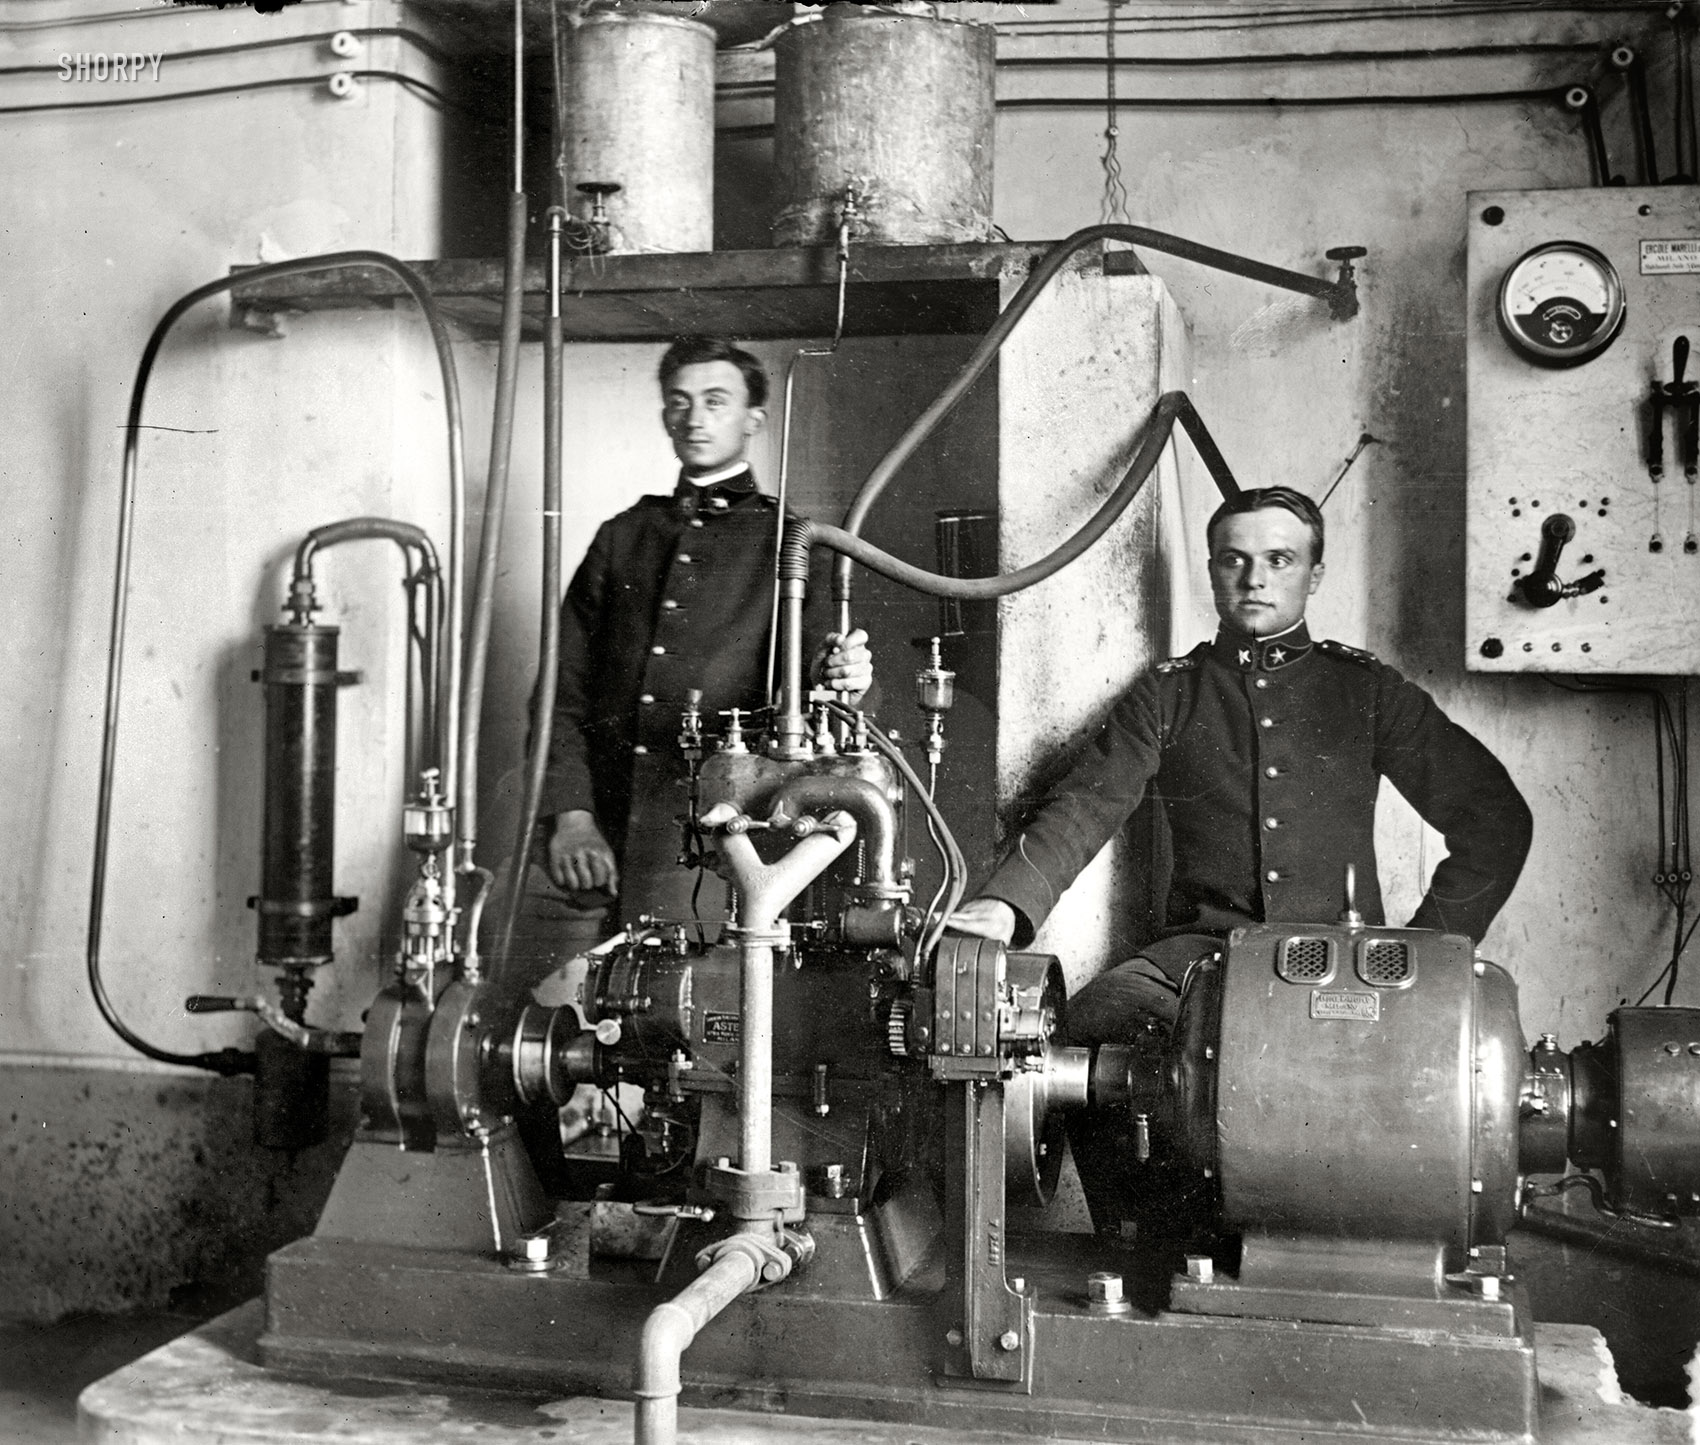 Turin, Italy, circa 1912. "Bernocchi (left) and wireless iconograph." The inventor Francesco de Bernocchi and his fax-like device, which by means of "Hertzian waves" was said to facilitate the "exact wireless transmission of messages, sketches, autographs, shorthand and other signs, with a secrecy hitherto unattained." Bain News Service glass negative. View full size.
